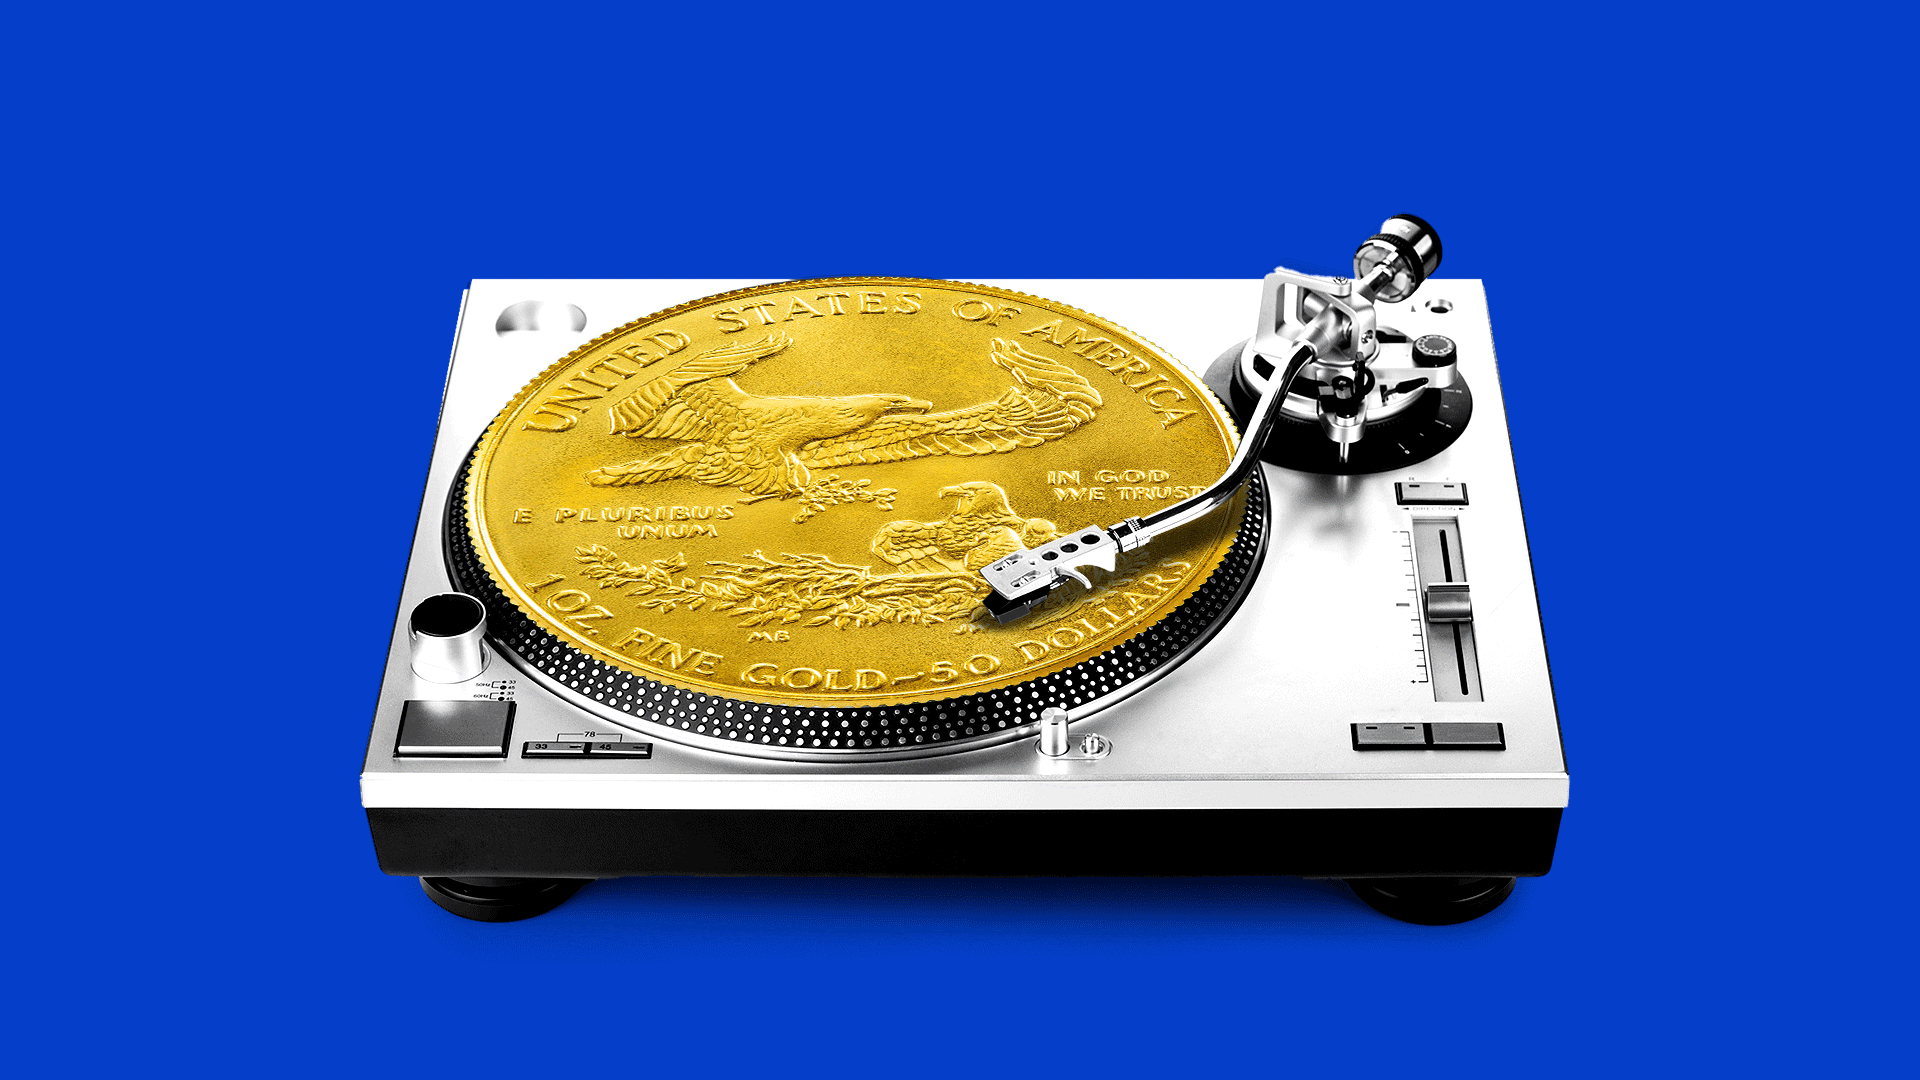 A gif of a coin spinning on a record player